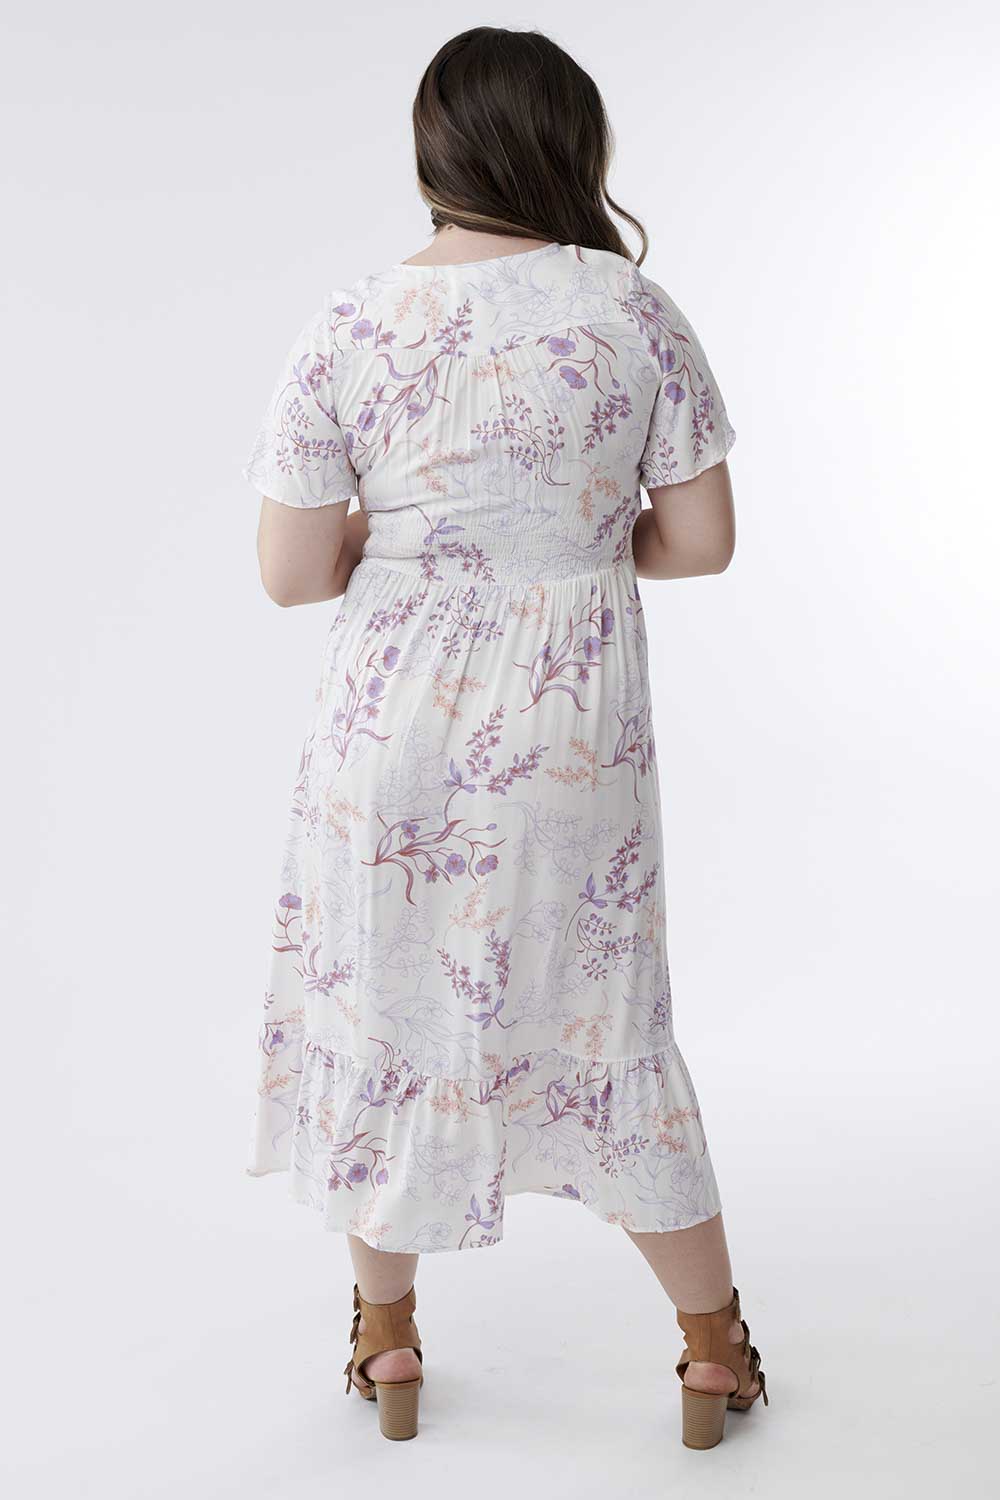 She is Gorgeous Floral Smocked Dress